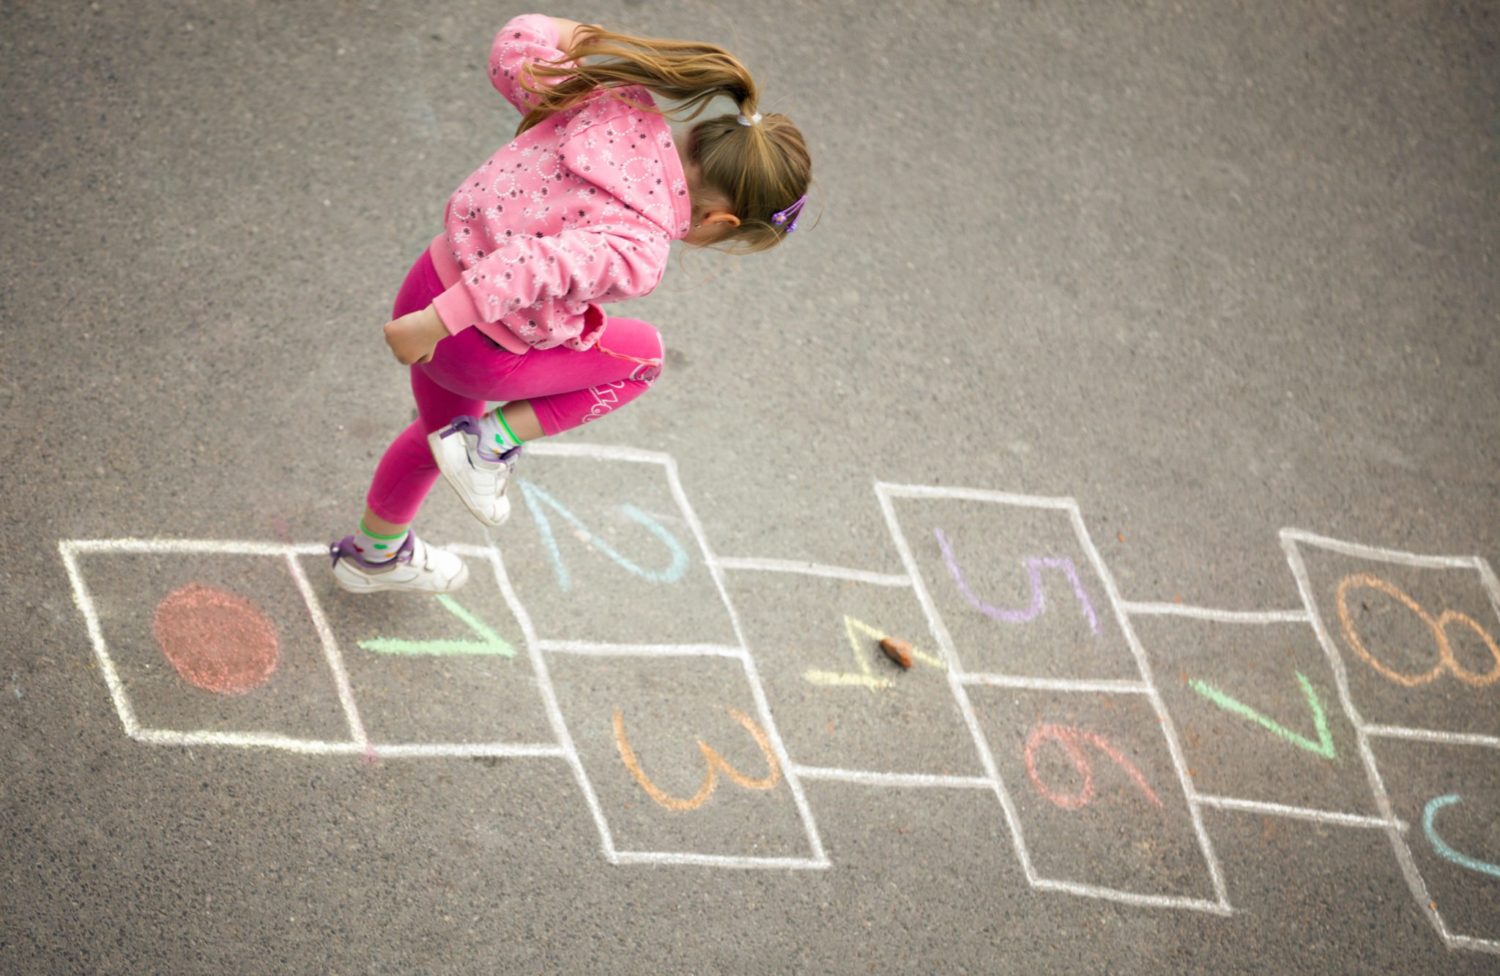 Did you ever learn how to play hopscotch? Let www.GameOnFamily.com teach you the hopscotch rules for this classic outdoor kids game. Game on!